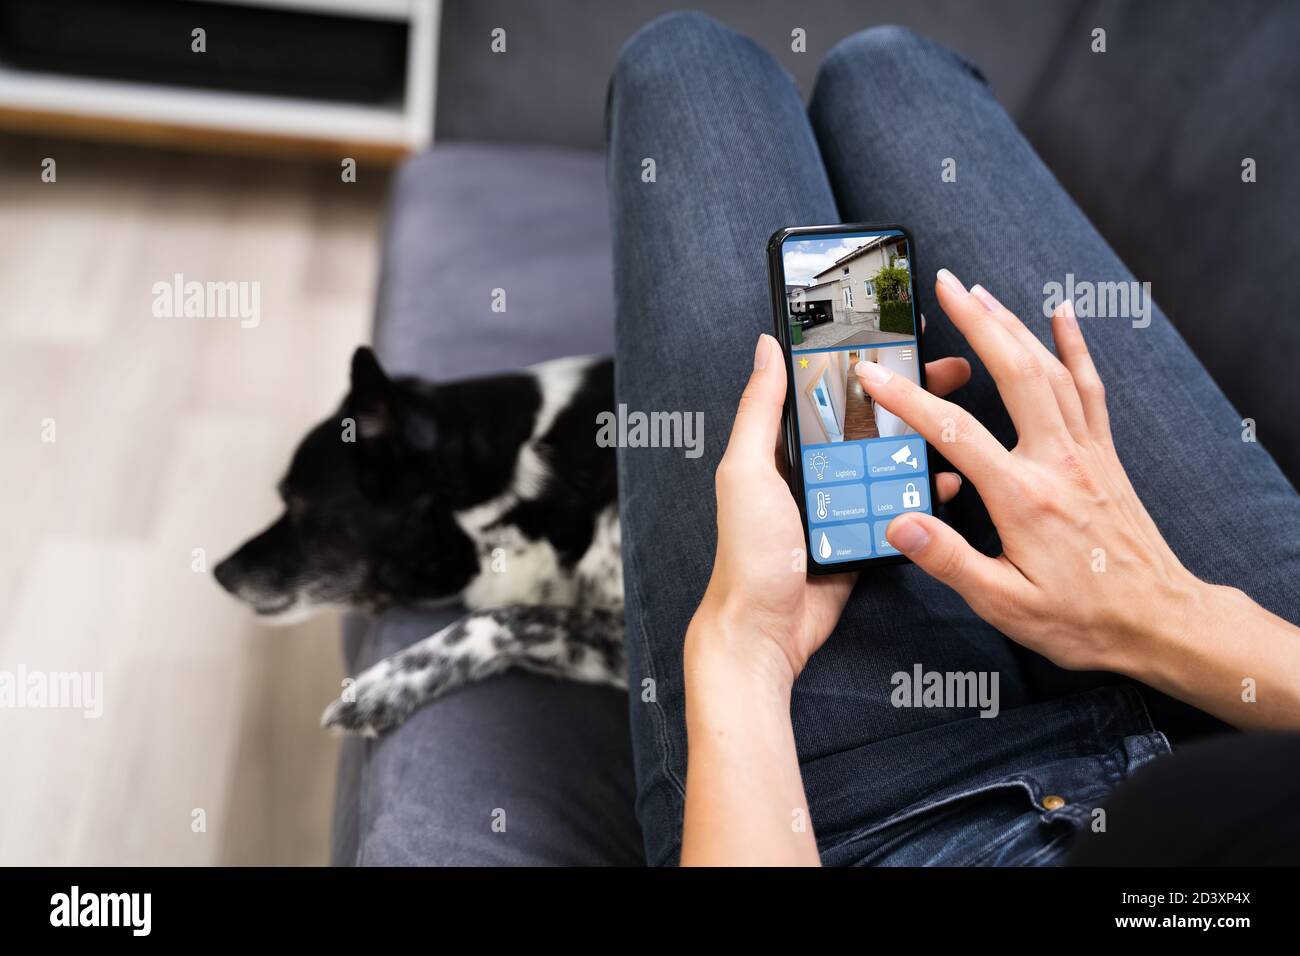 Smart House CCTV Security Camera App On Mobile Phone Stock Photo